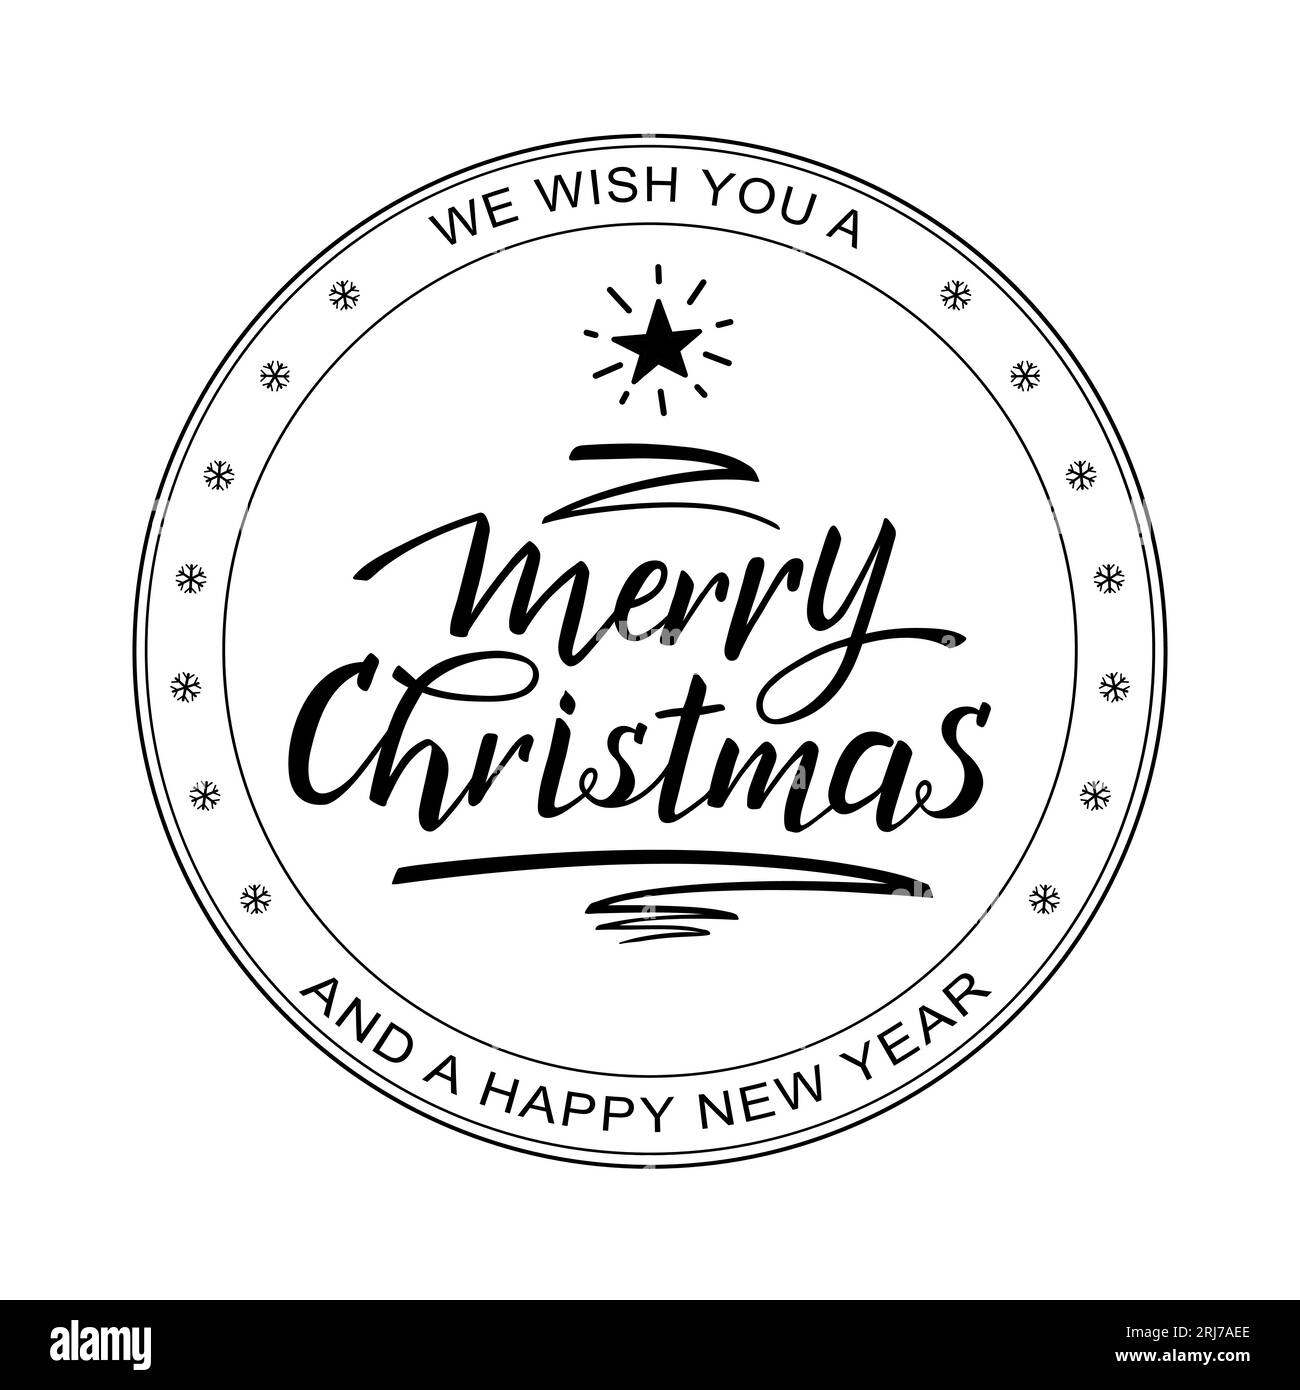 We wish you a Merry Christmas and a Happy New Year. Rubber stamp. Christmas Tree pen stroke with a star. Handwritten vintage calligraphic text Stock Vector